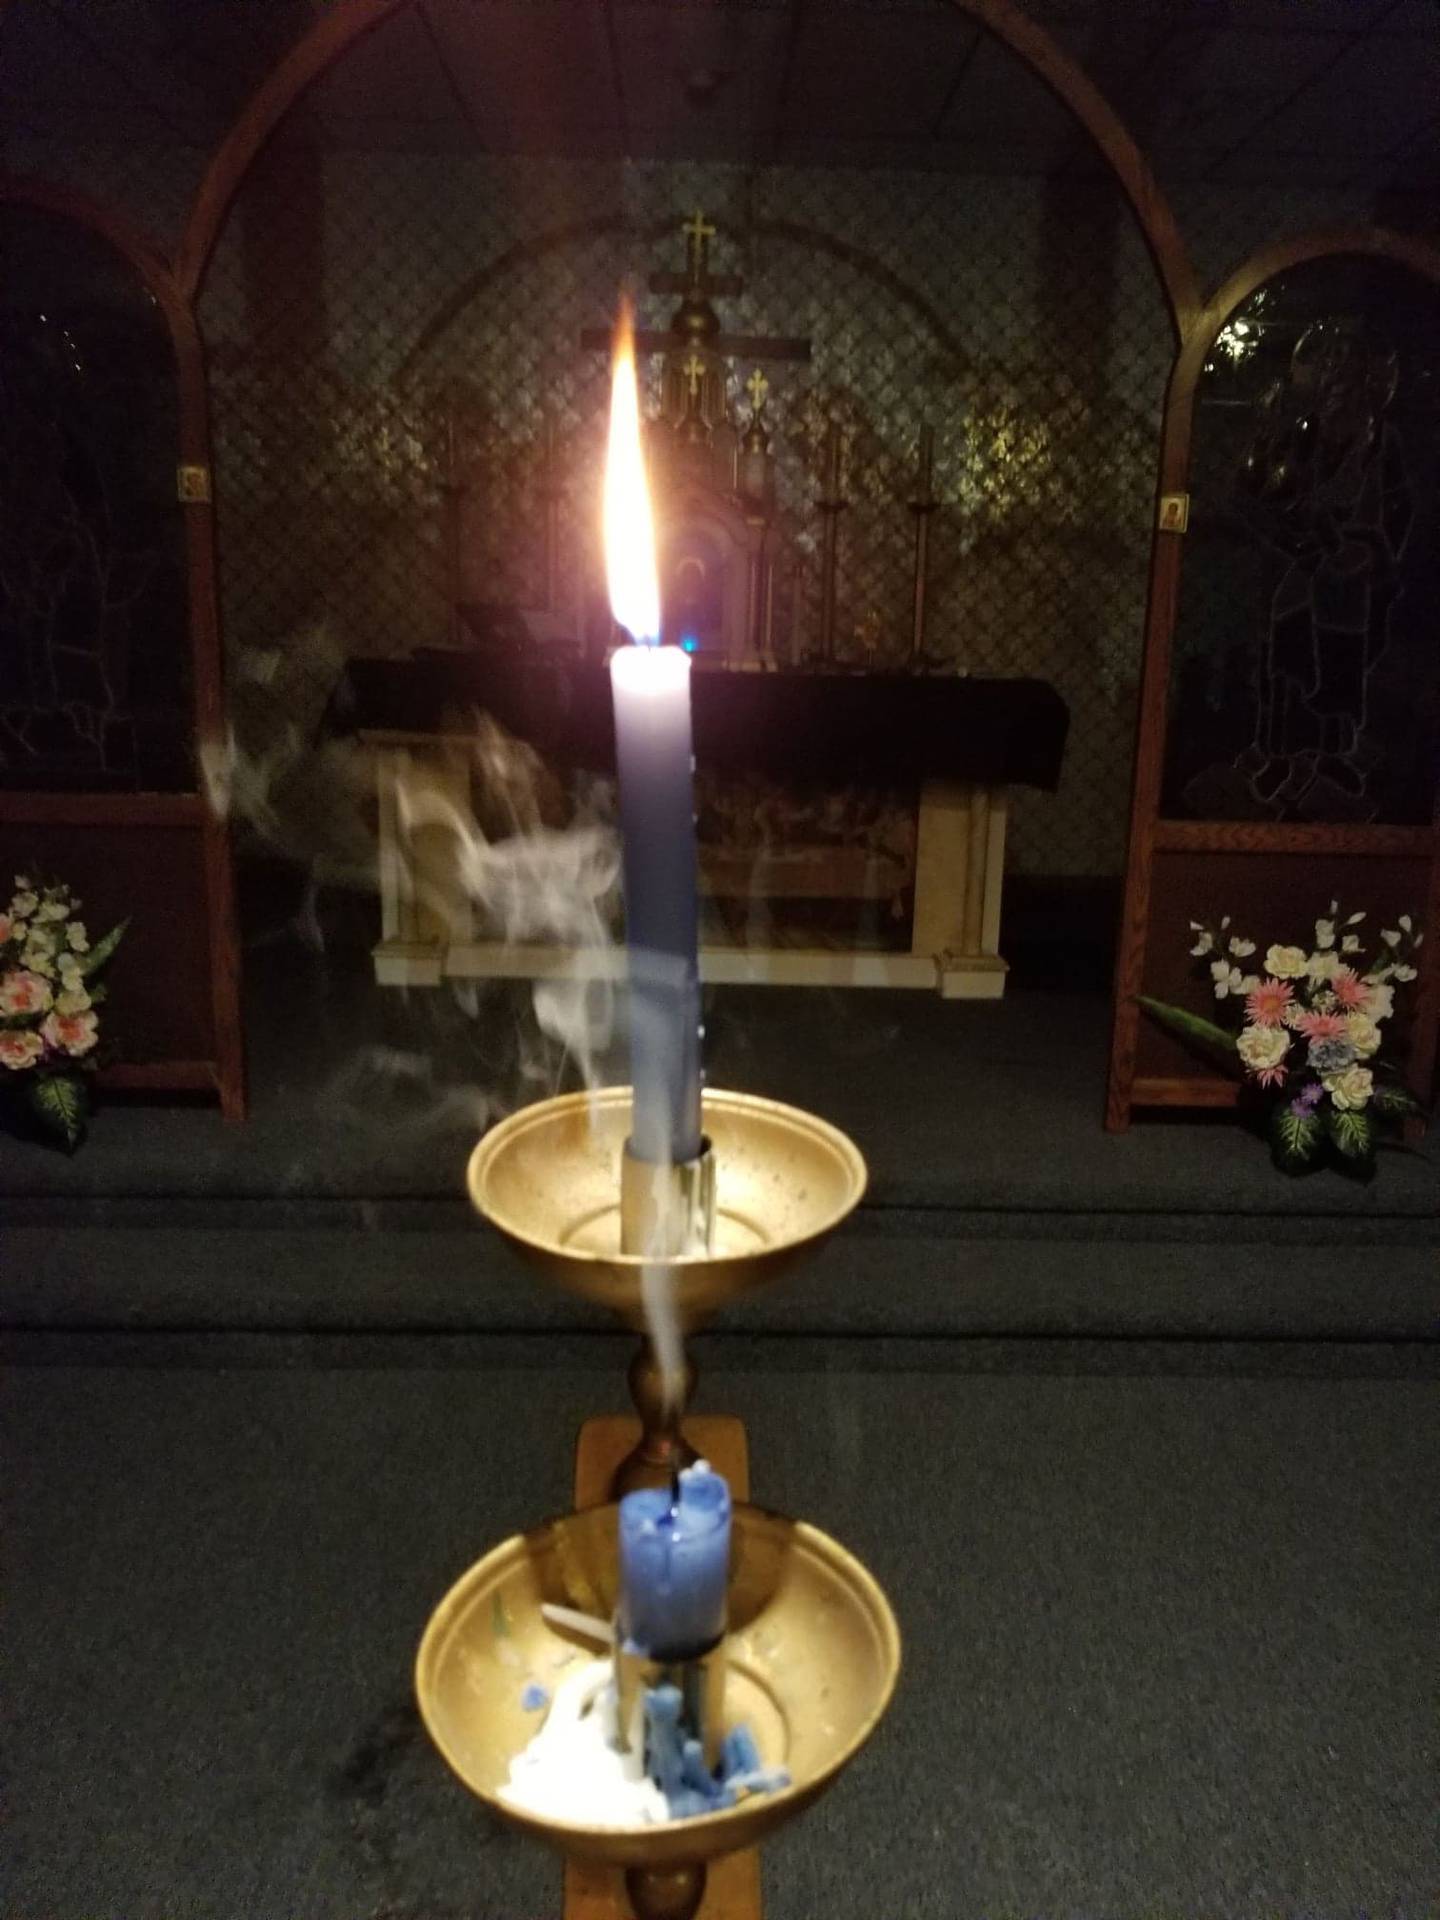 Pictured is candle from resurrection matins during a pre-pandemic year at St. Nicholas Orthodox Church in Homewood, which is under the Ukrainian Orthodox Church – Kyiv Patriarchate.